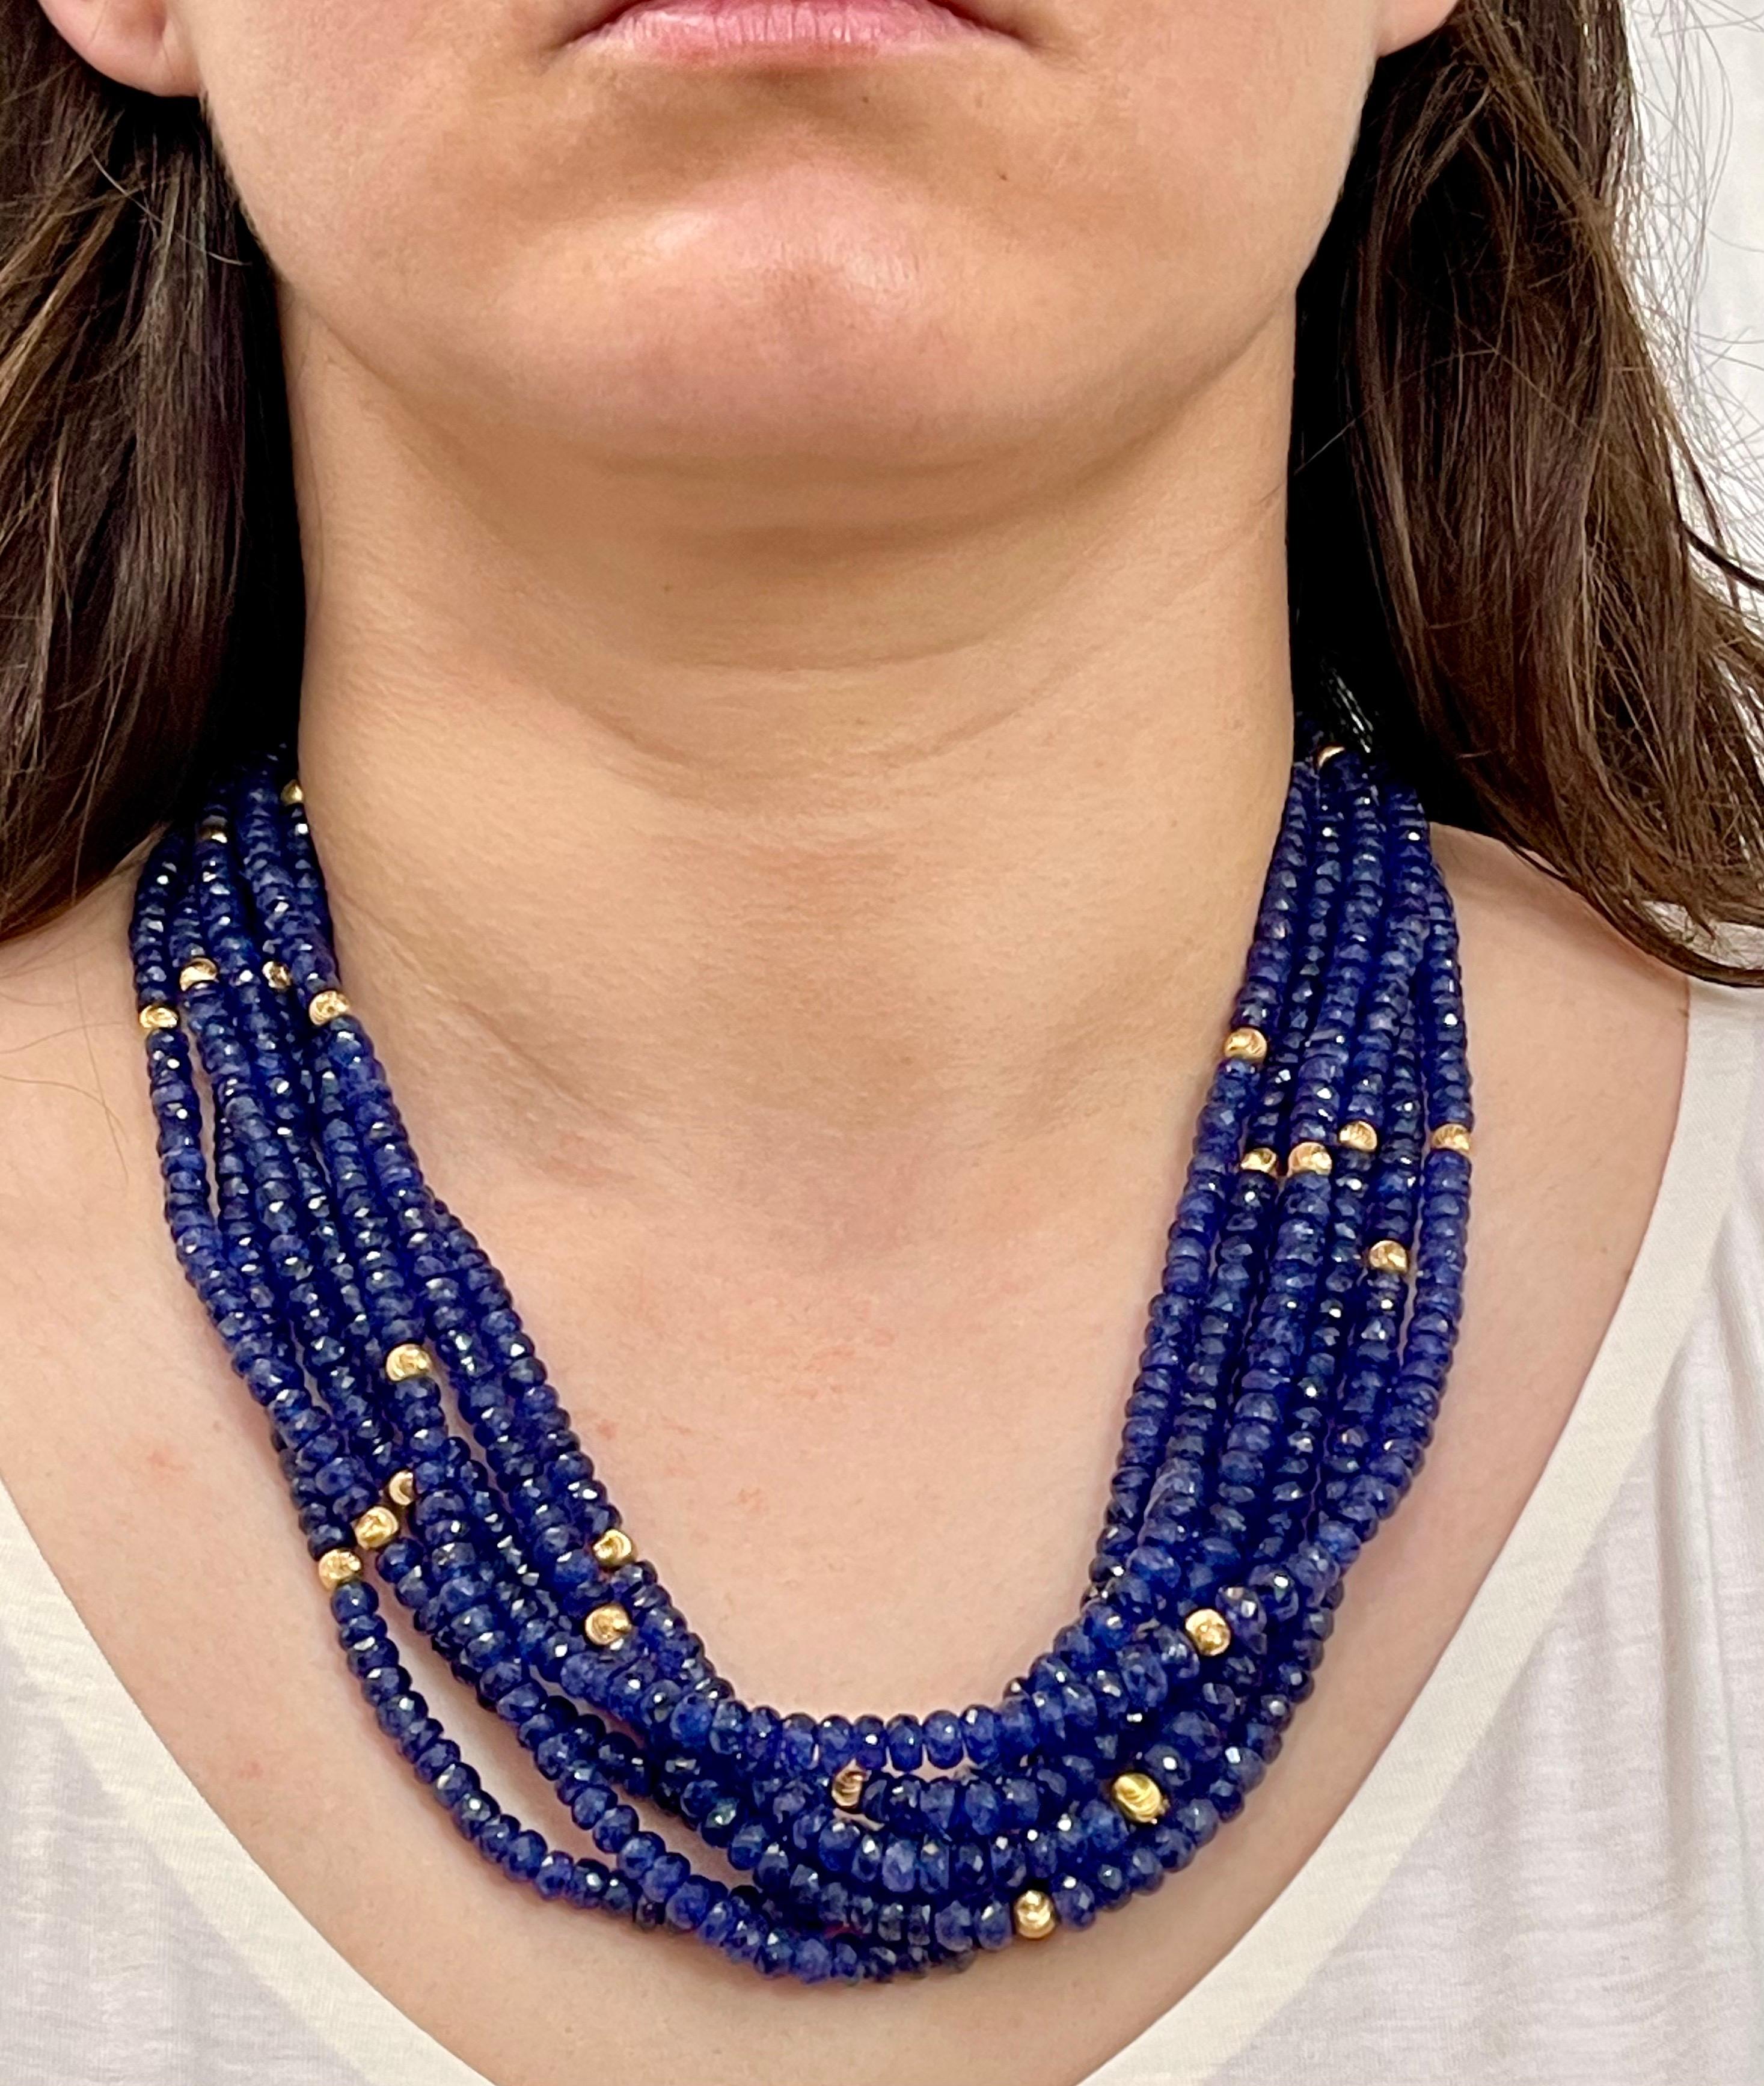 Twisted 1275 Ct Natural Tanzanite Bead Seven Strand Necklace + 15 Gm 14 K Y Gold In Excellent Condition For Sale In New York, NY